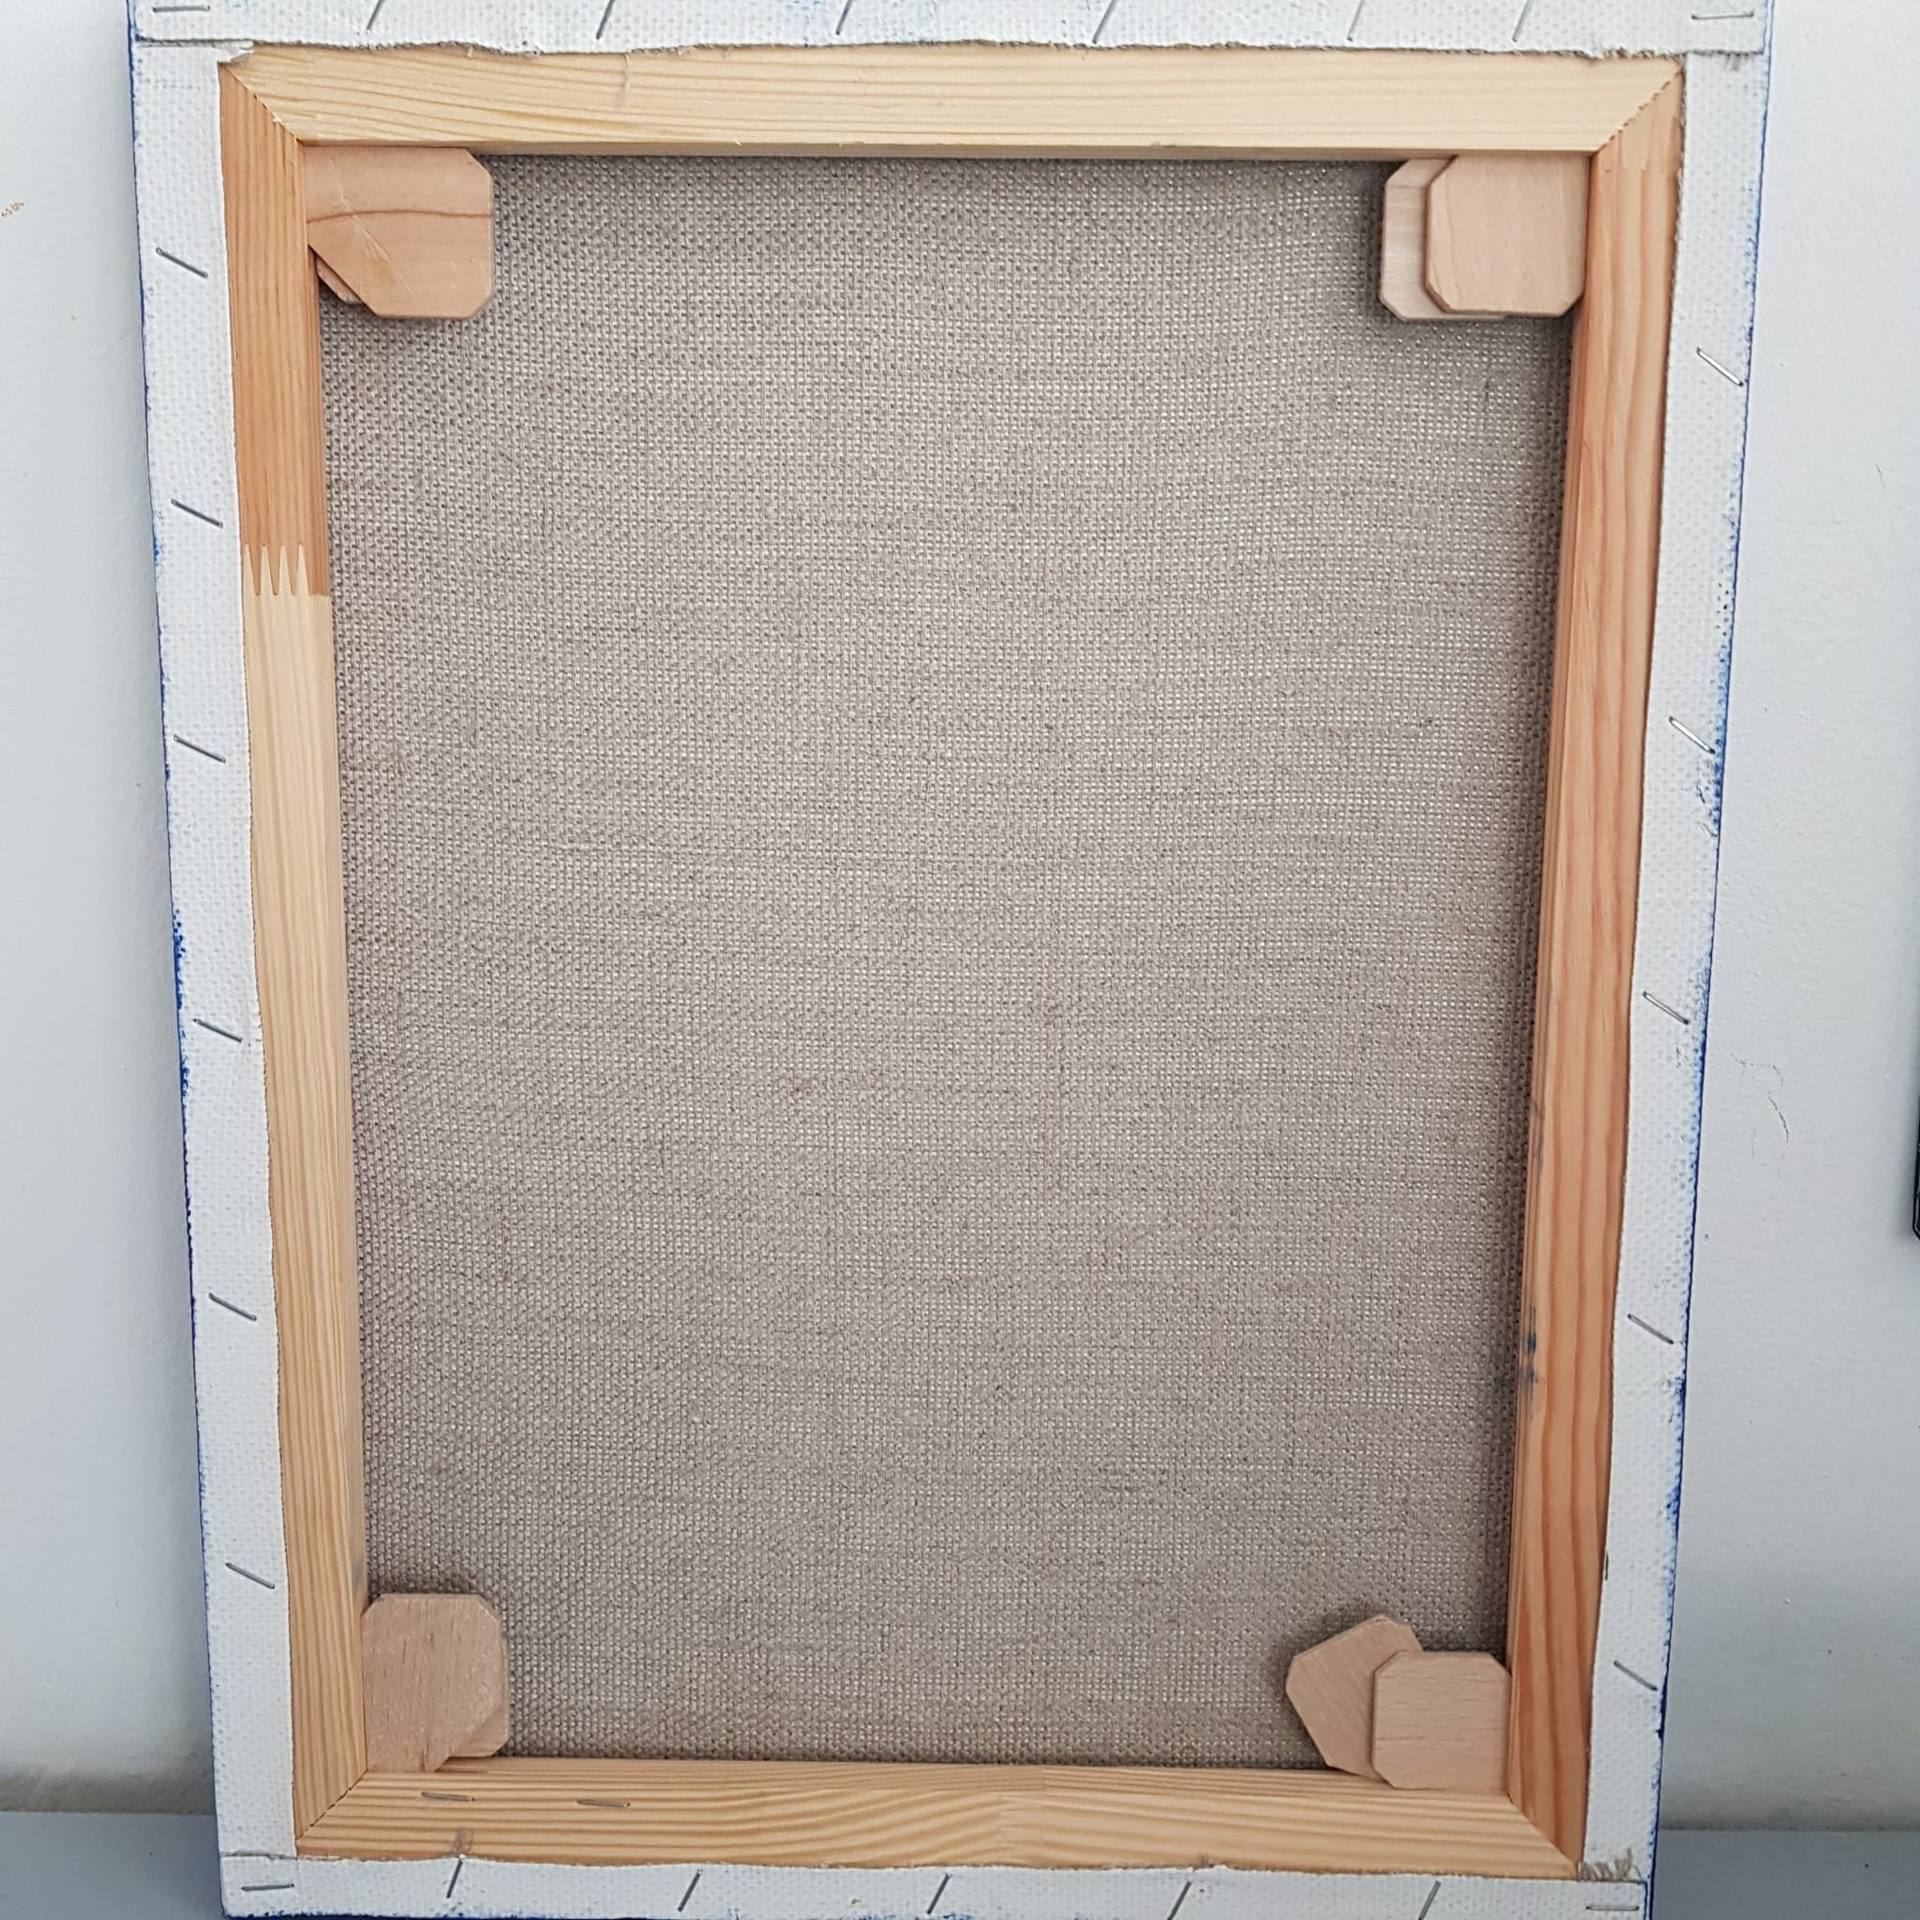 What Are The Little Pieces of Wood That Come With A Canvas?